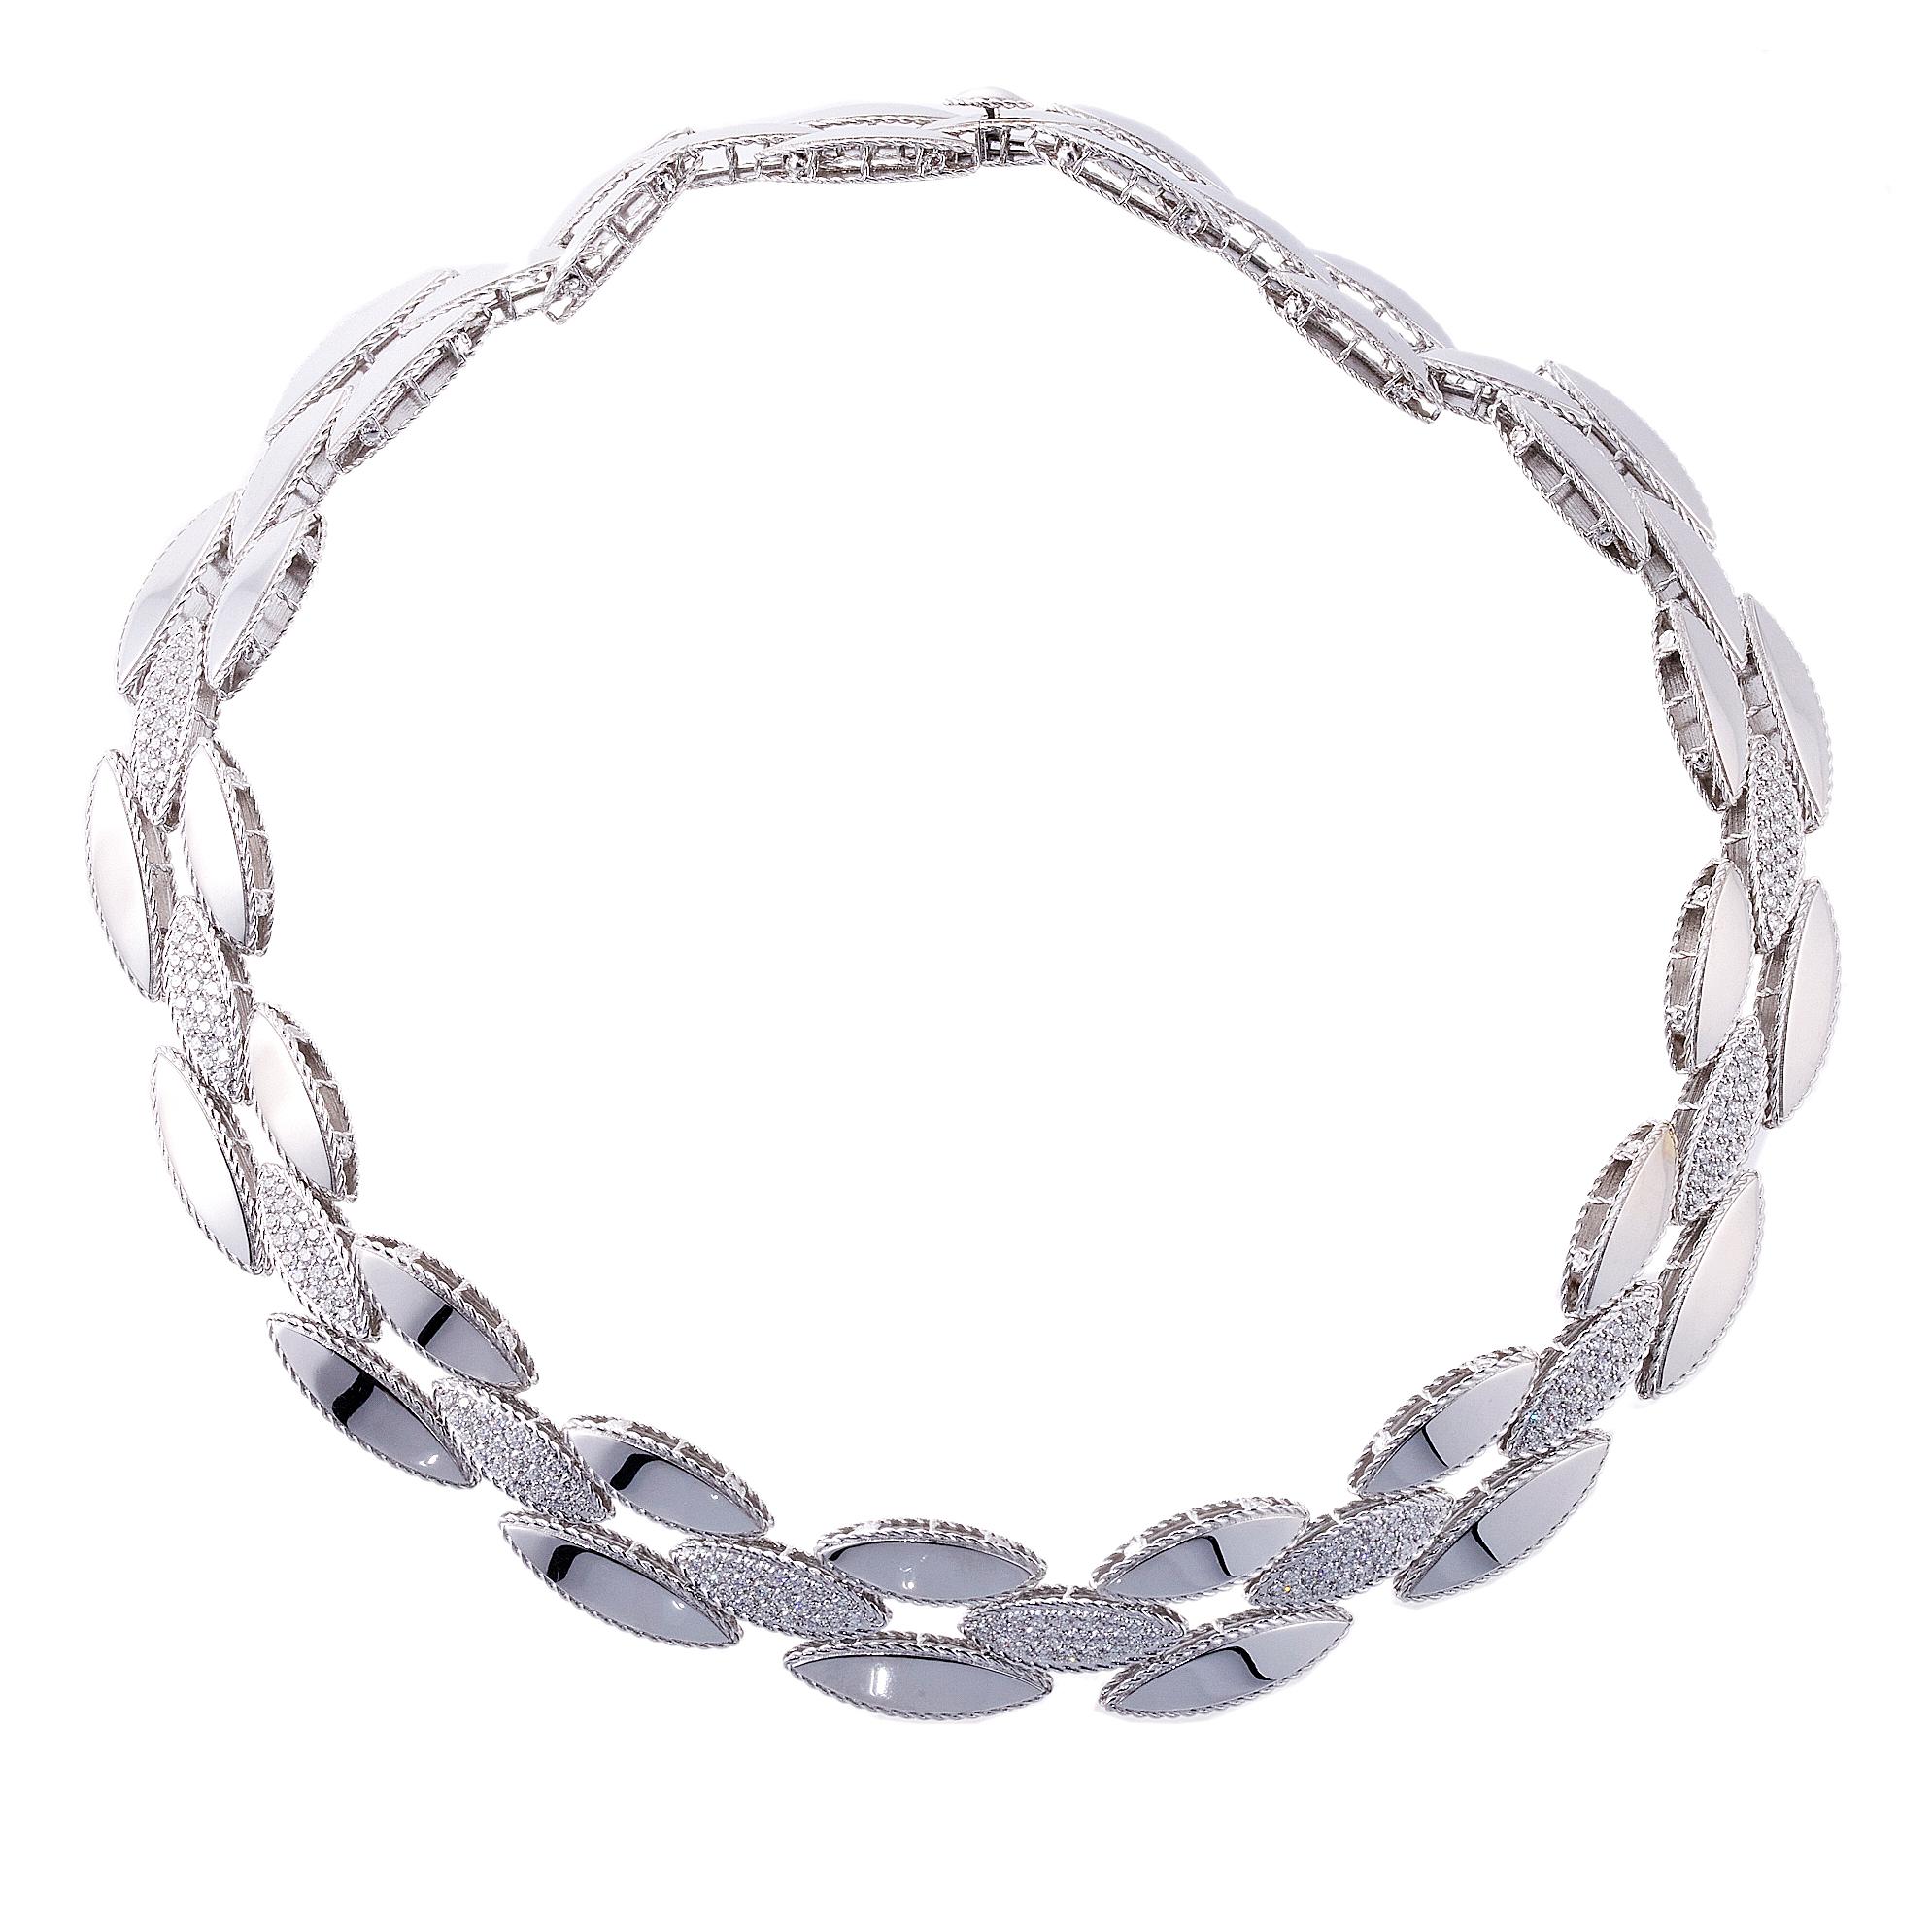 18K white gold Roberto Coin choker necklace, set with 3.35ctw in G/VS diamonds. Necklace measure 17